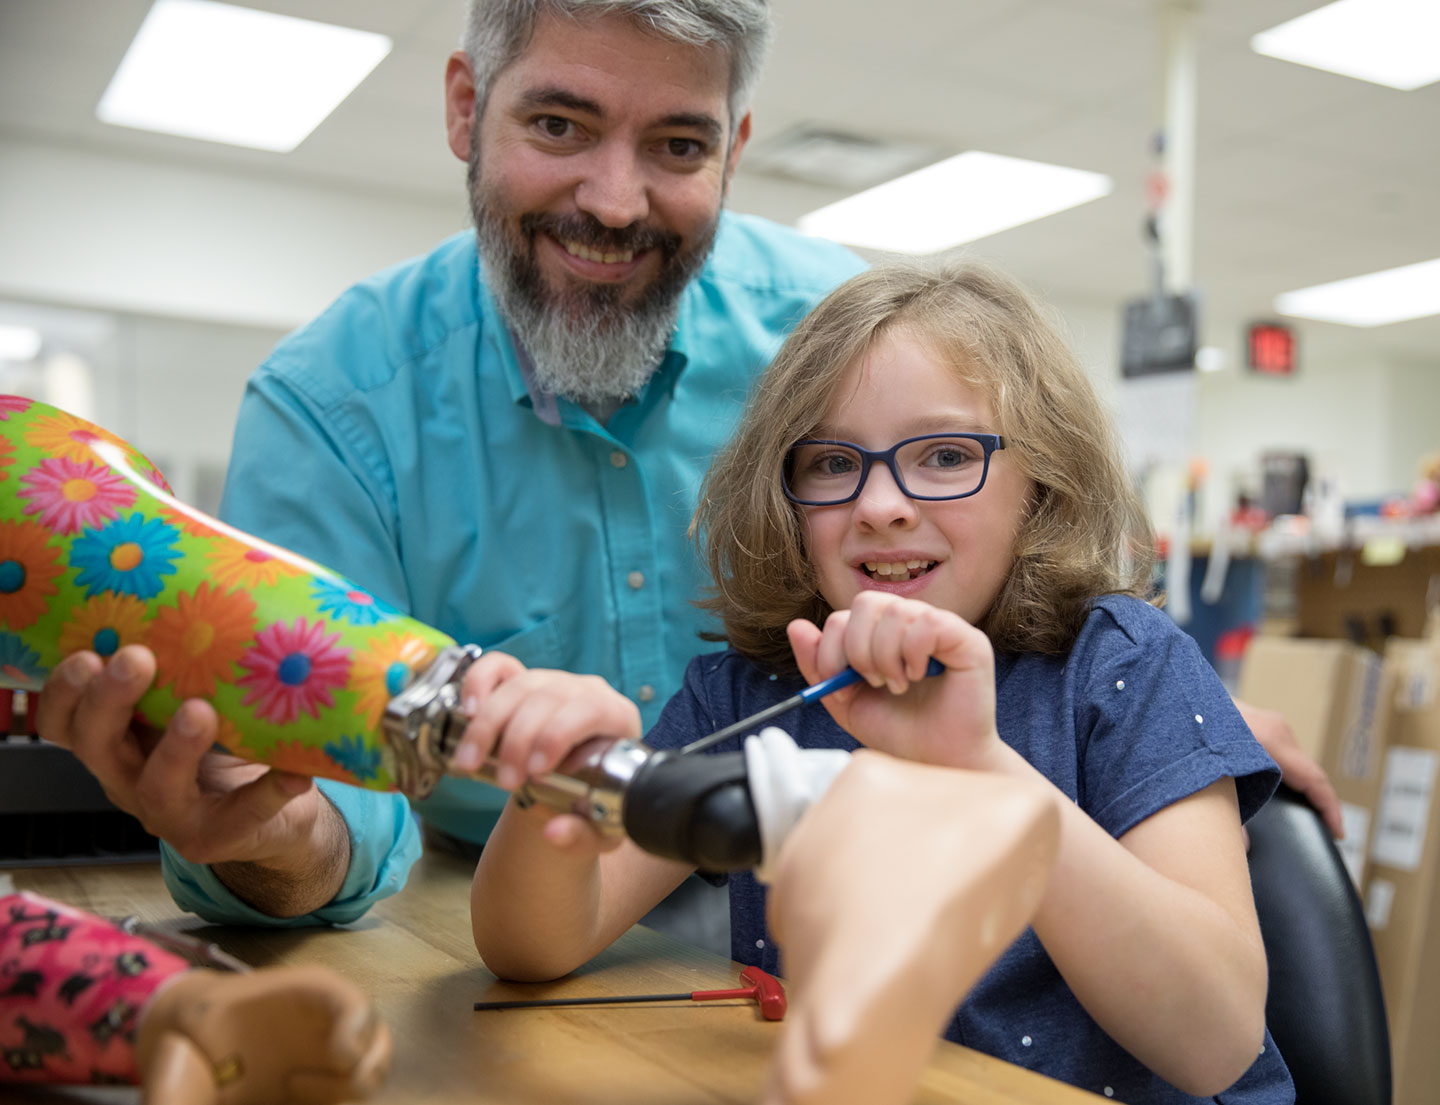 orthotist and patient work on prosthetic leg